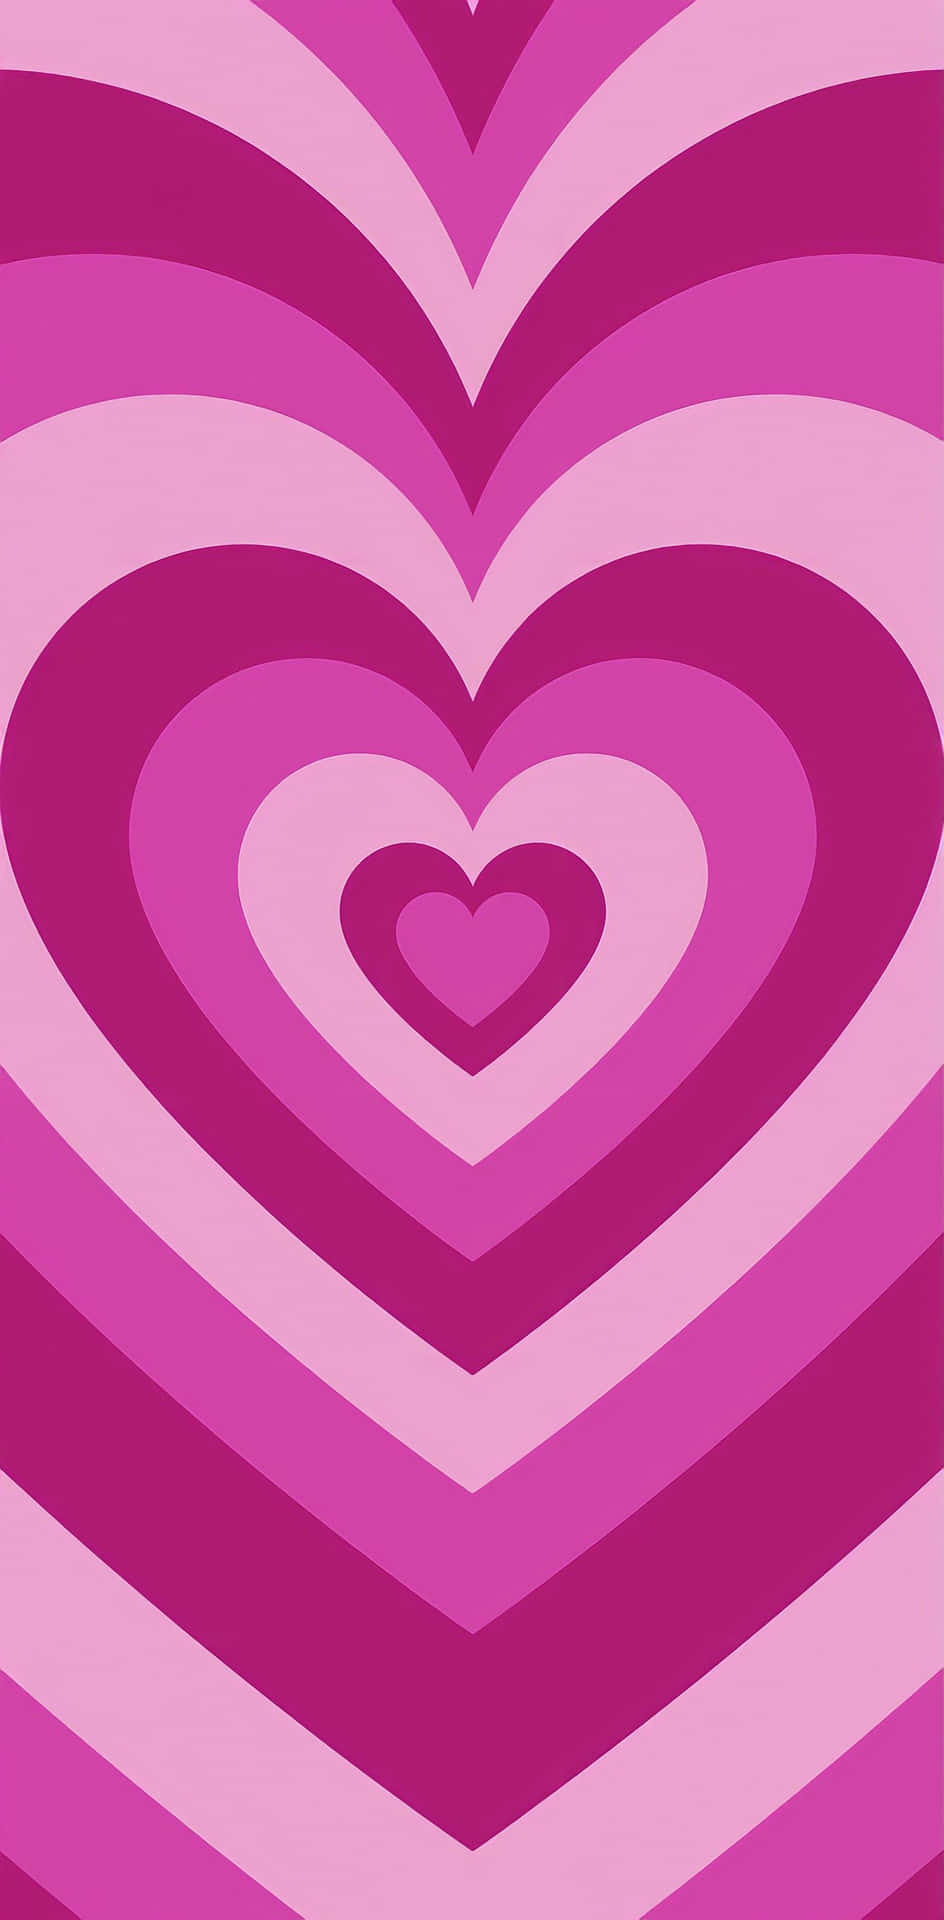 A Pink And White Heart Shaped Pattern Wallpaper